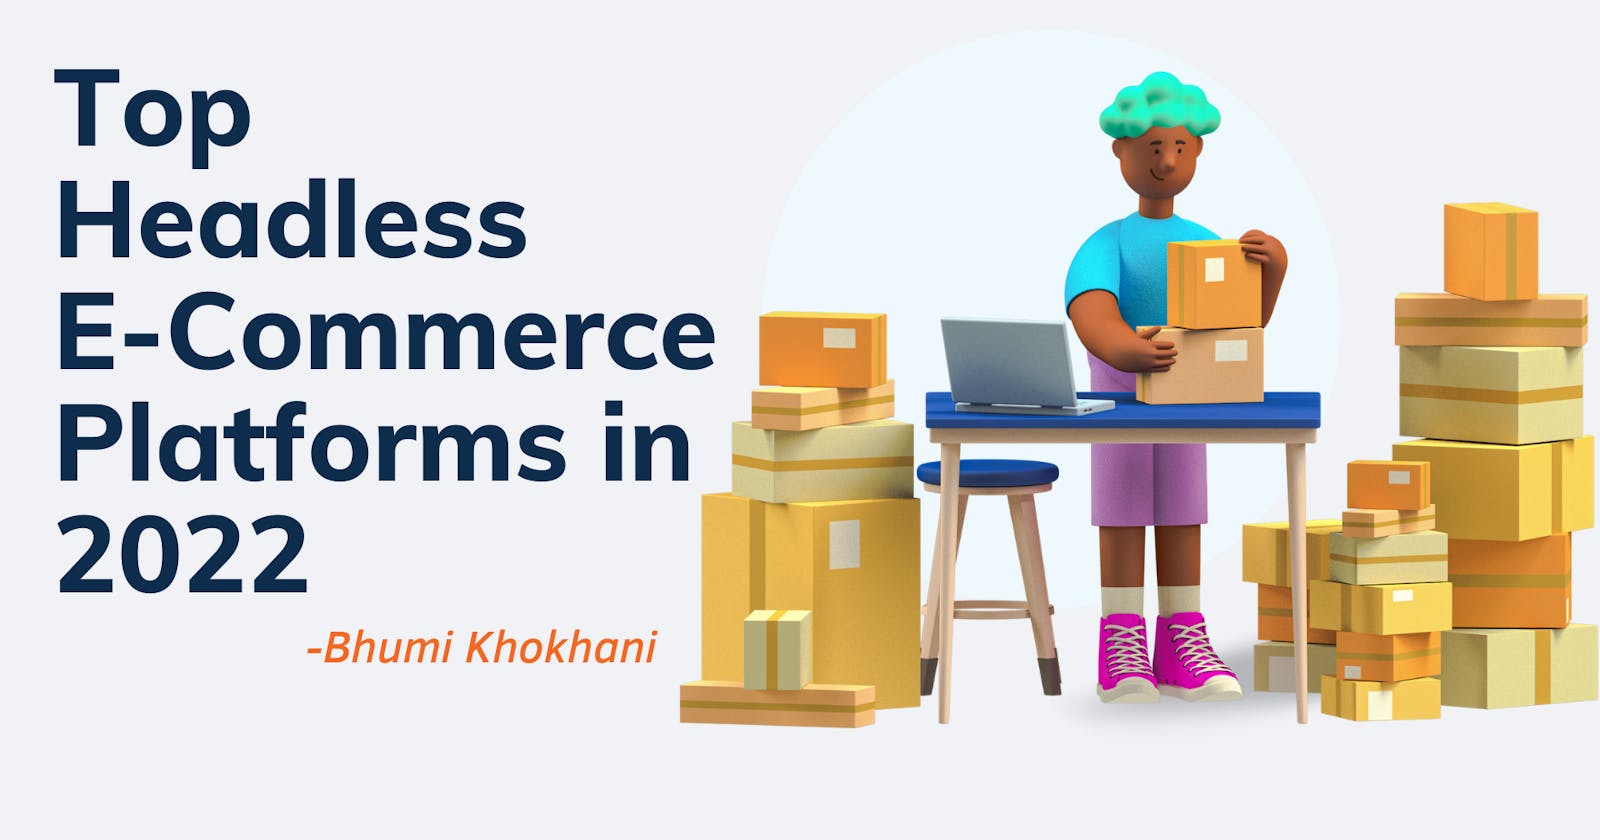 Top Headless E-Commerce Platforms in 2022